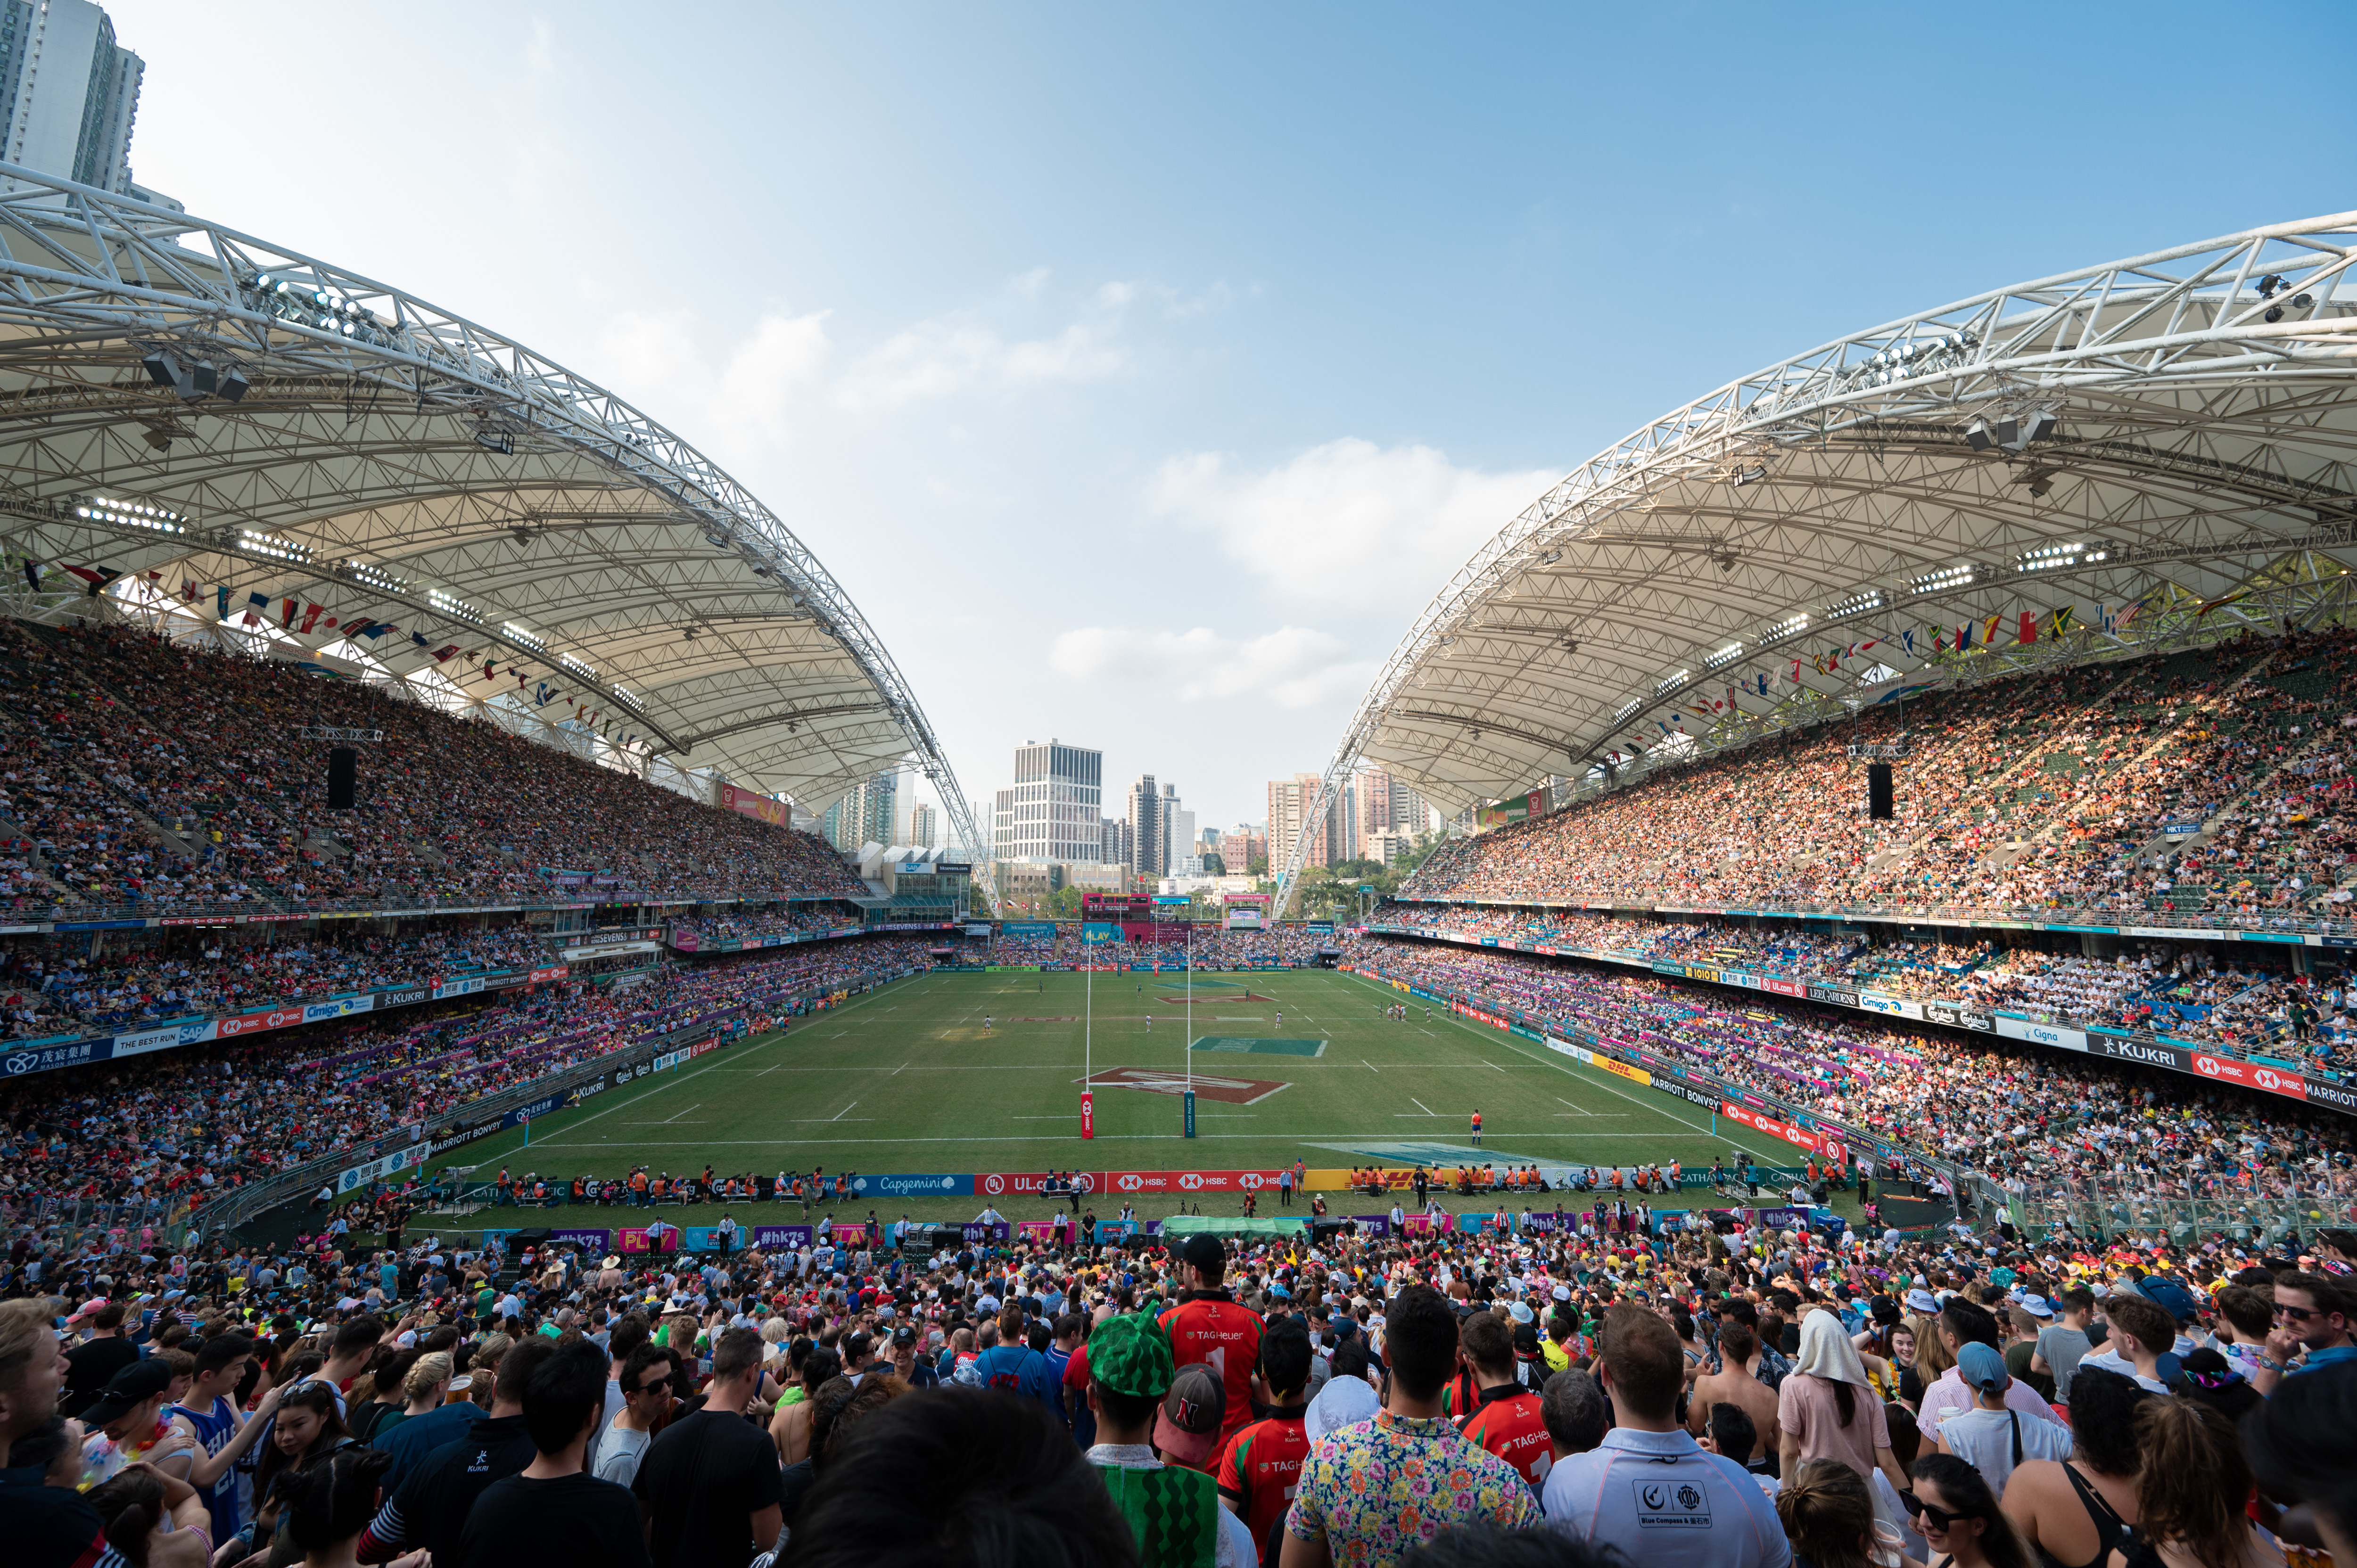 Statement on cancellation of Cathay Pacific/HSBC Hong Kong Sevens 2021